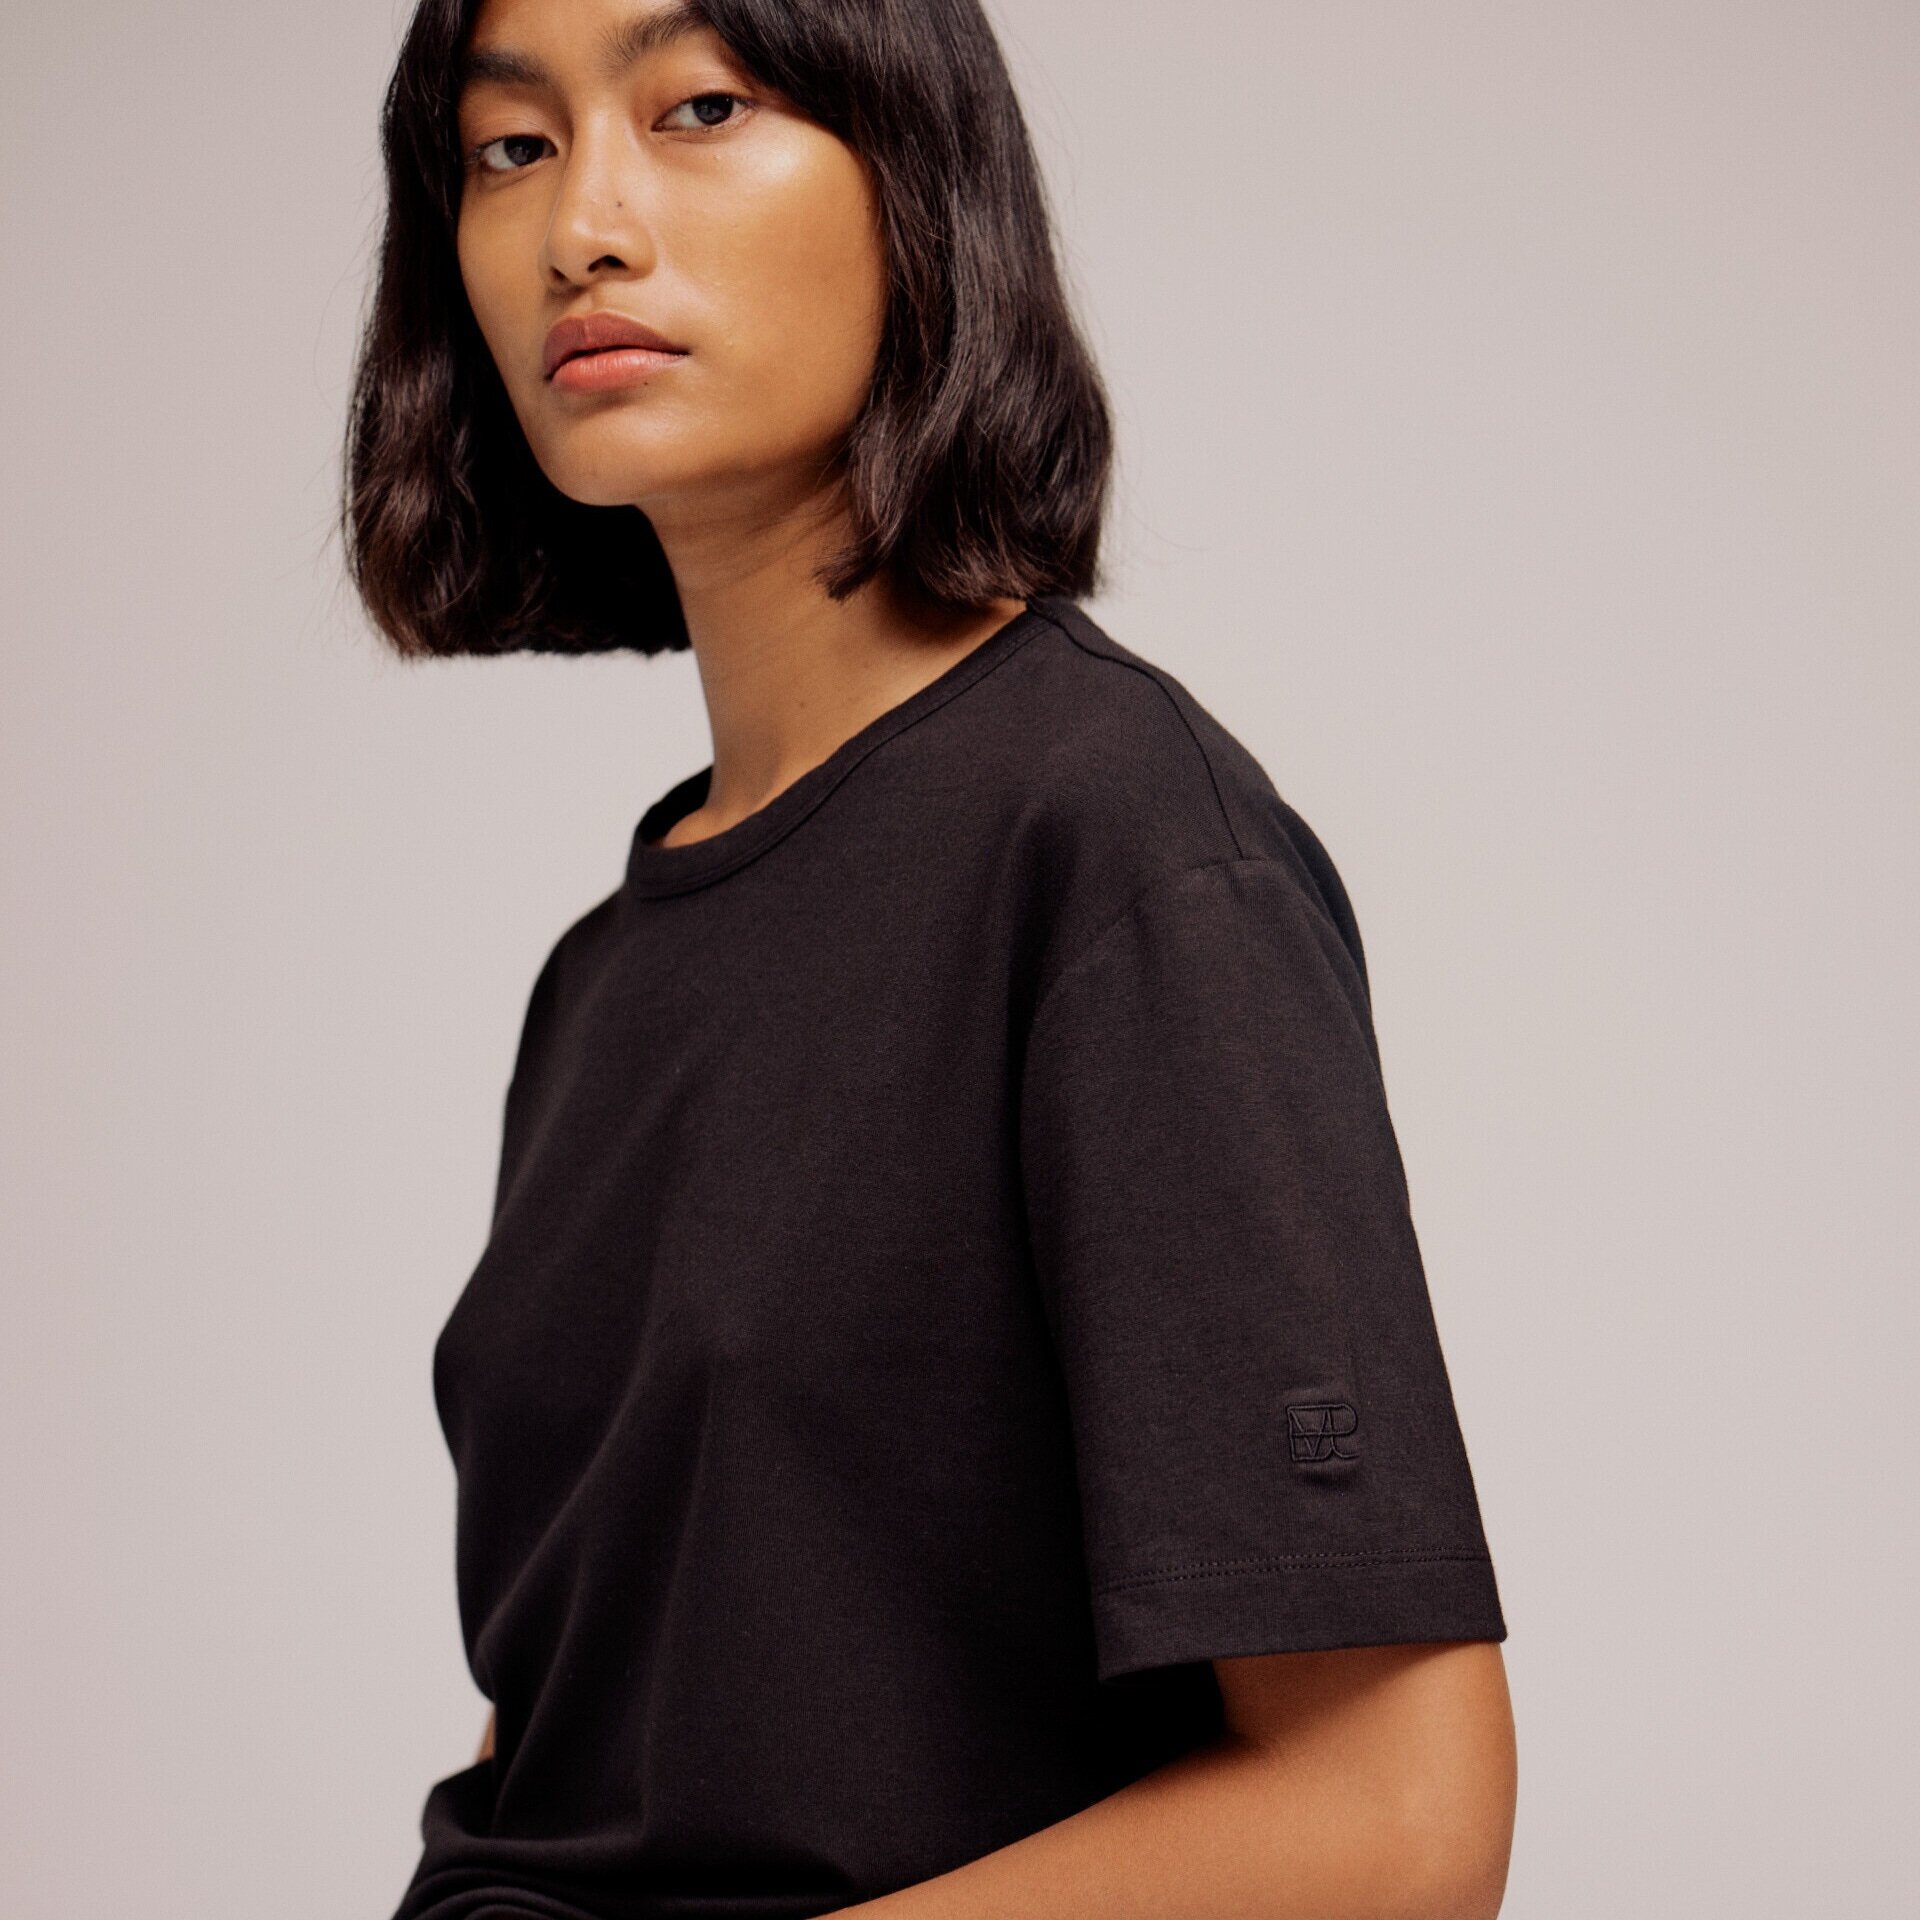 12 Minimalist Clothing Brands For Your Daily Uniform — The Denizen Co.